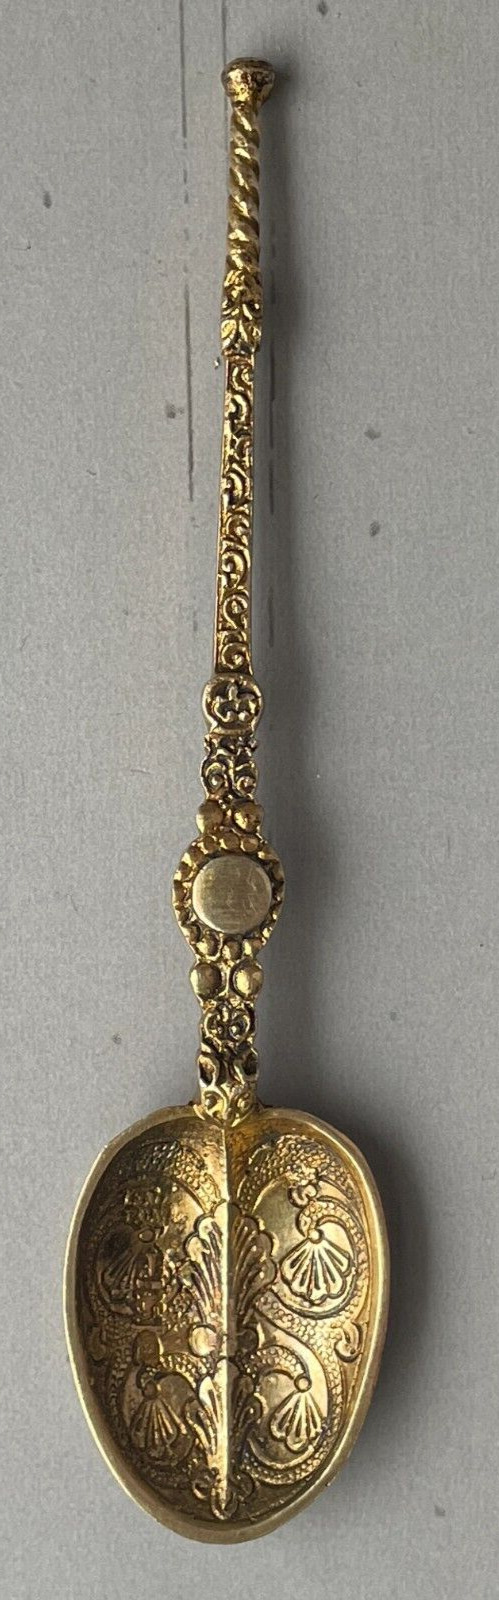 Miniature of the Royal Anointing Spoon for Edward VII 1902 England